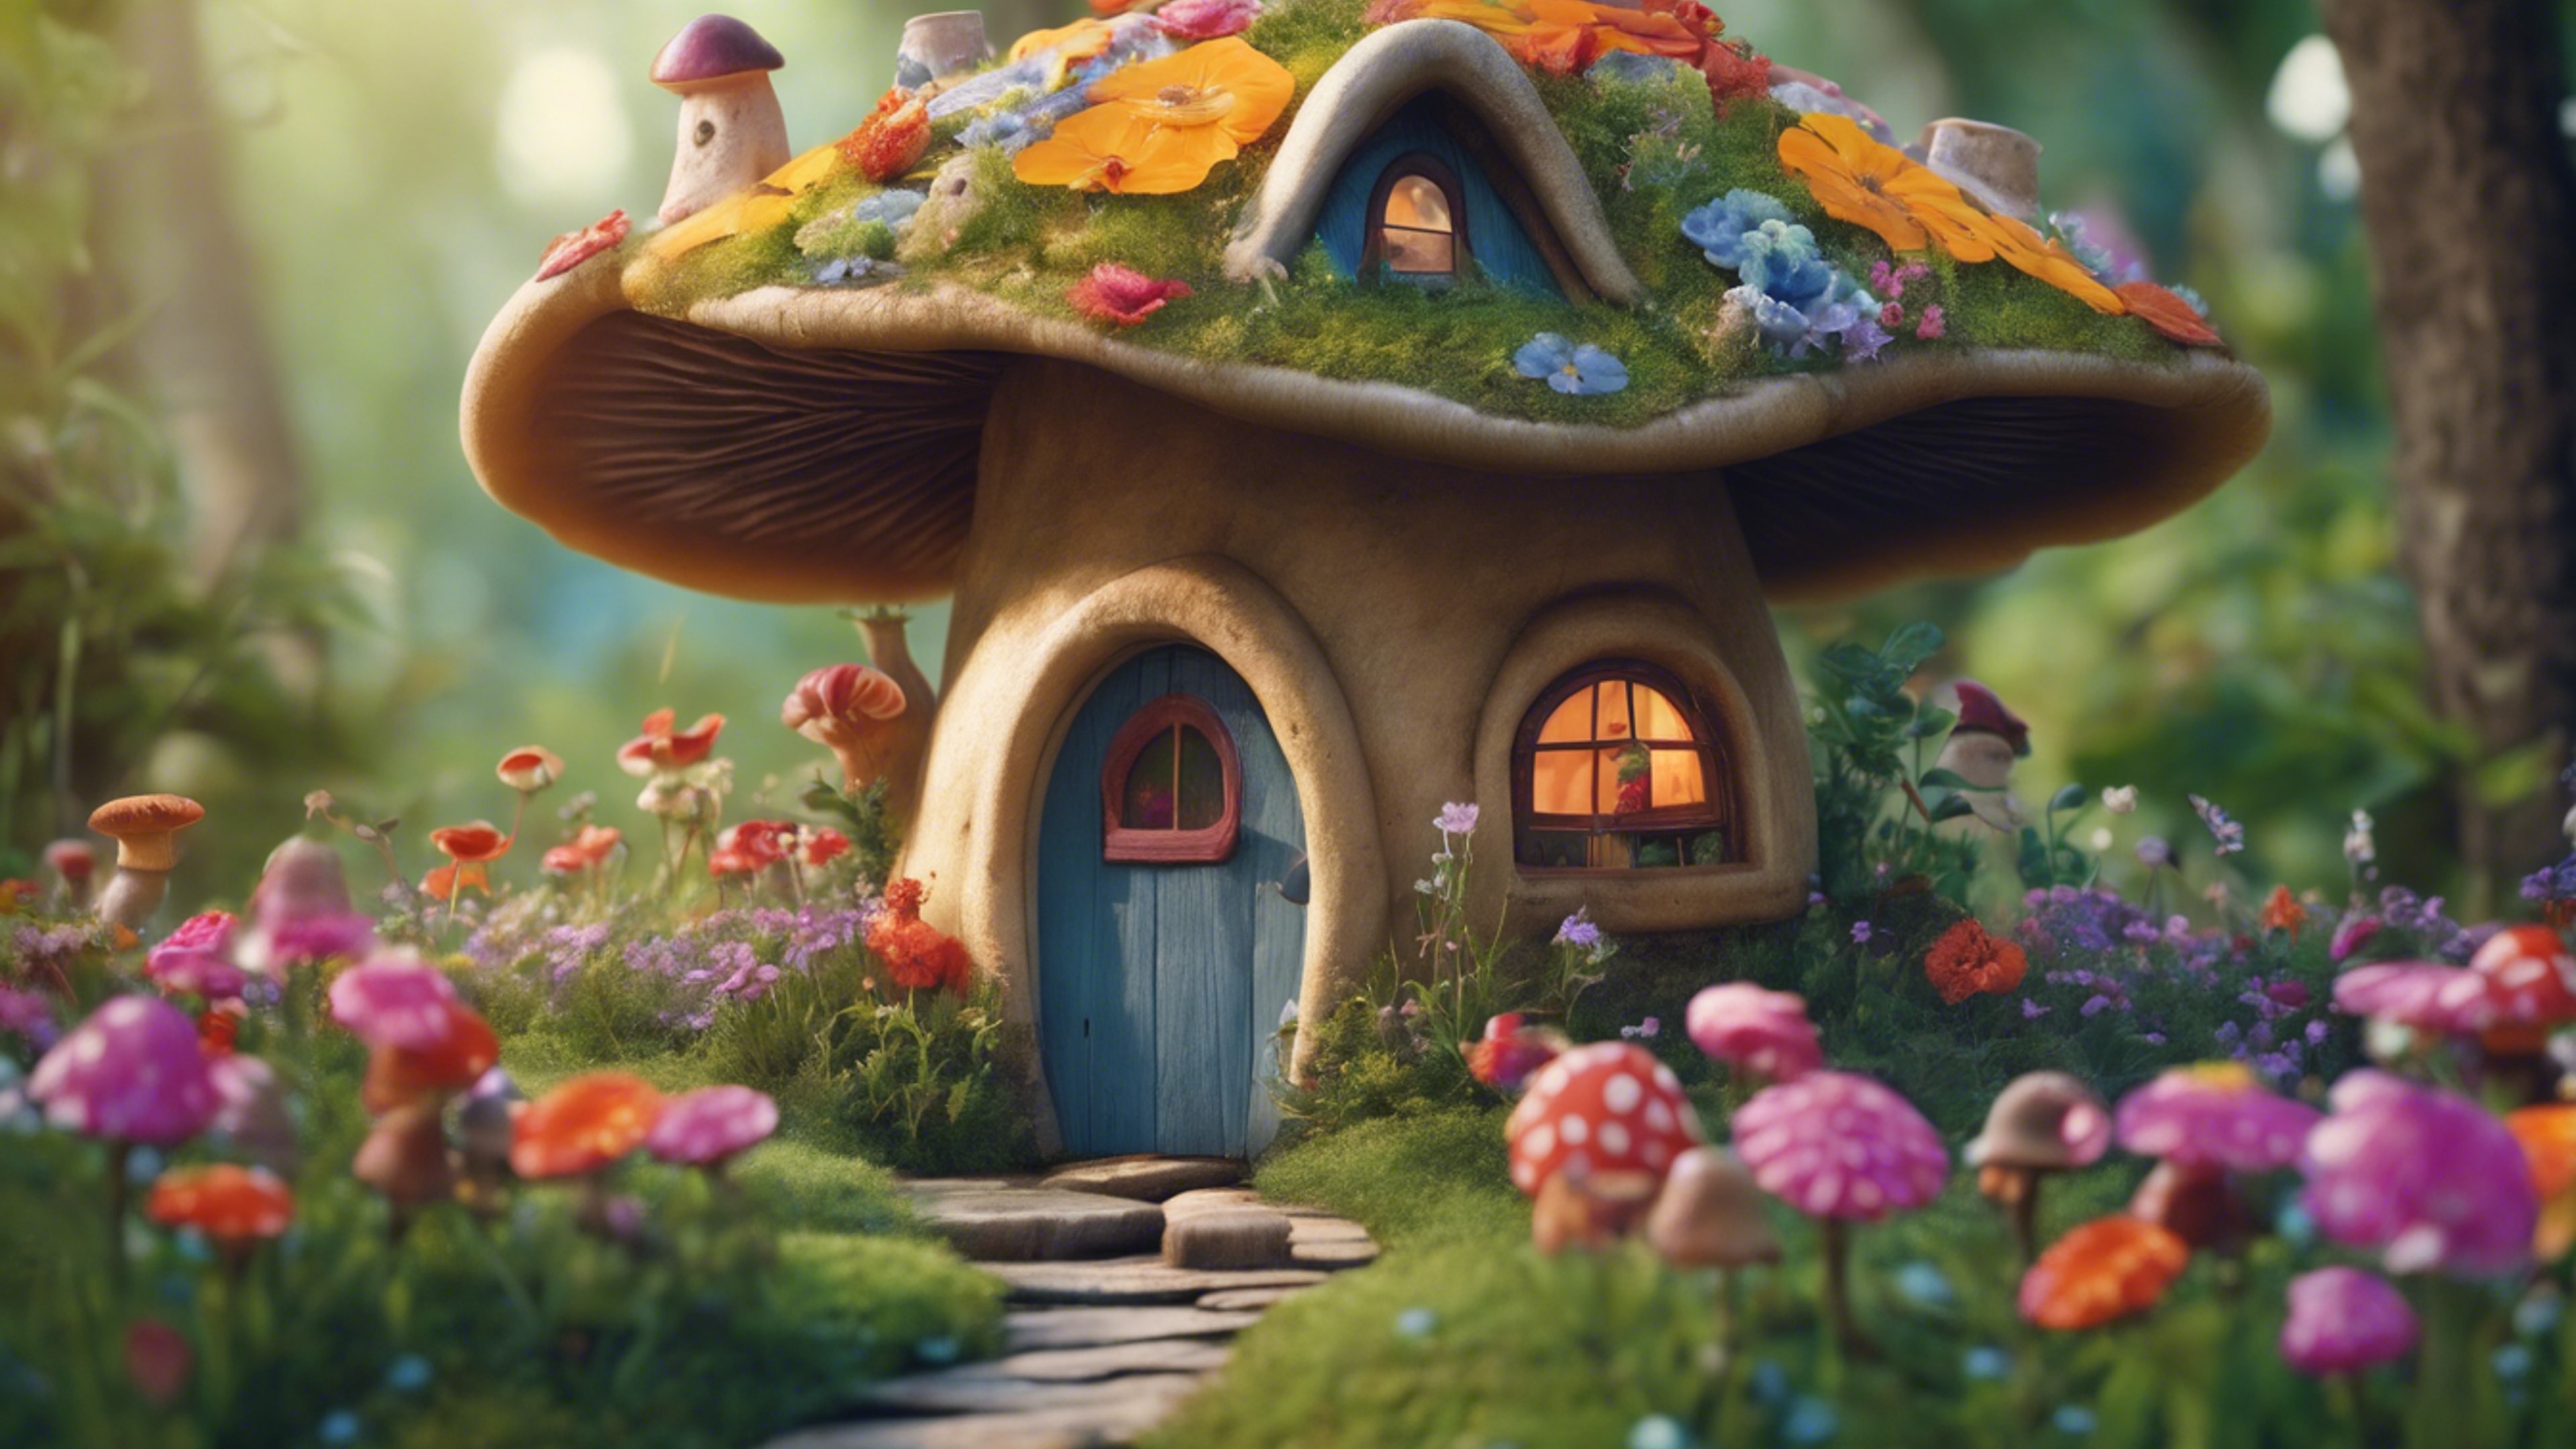 An old-fashioned, whimsical mushroom house, straight out of a children's storybook, nestled amid colorful flowers at the end of a winding path. Tapeta na zeď[bbbff29f860842789321]